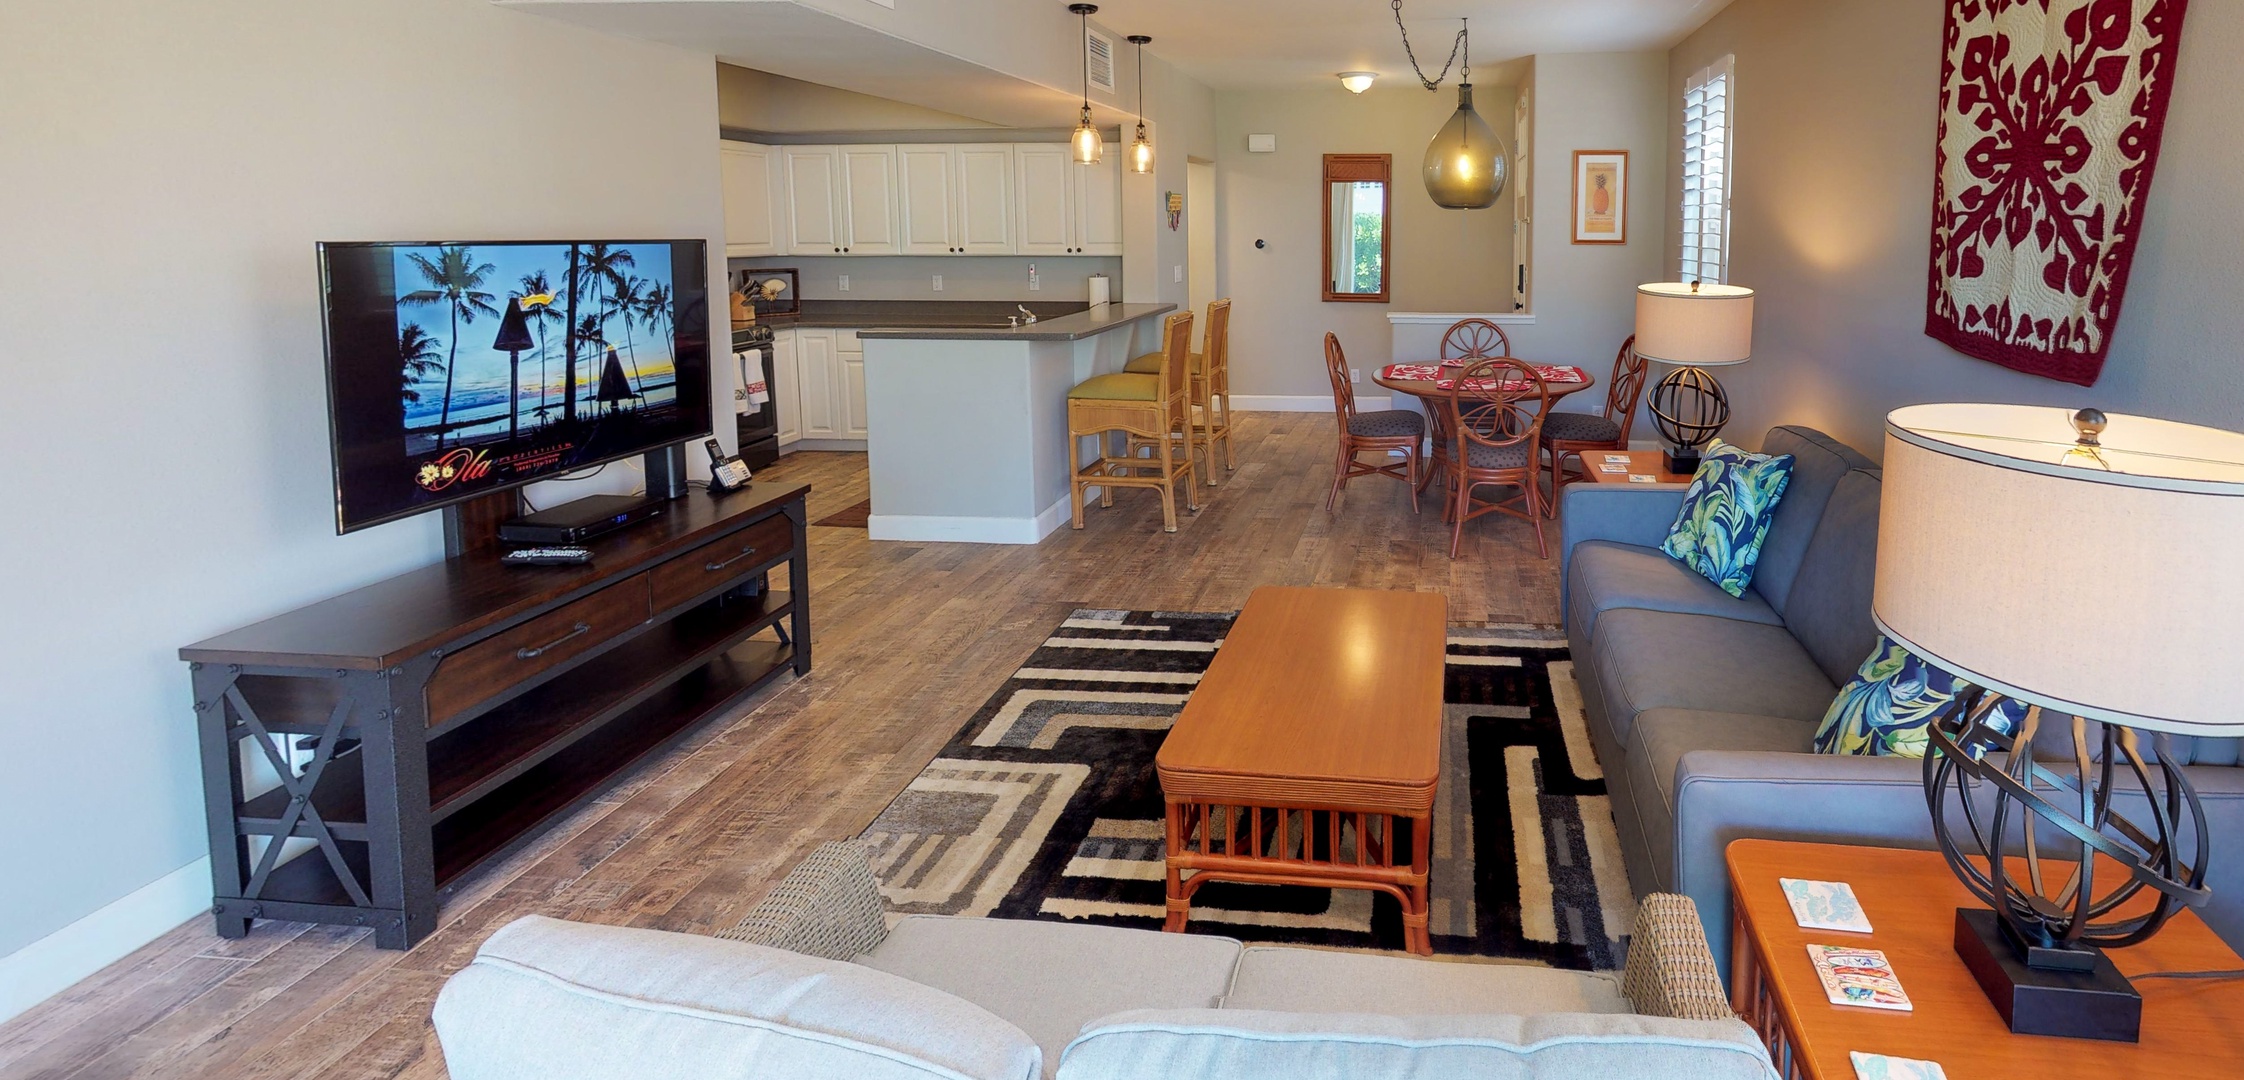 Kapolei Vacation Rentals, Ko Olina Kai 1051A - Watch your favorite shows on TV in your home away from home.